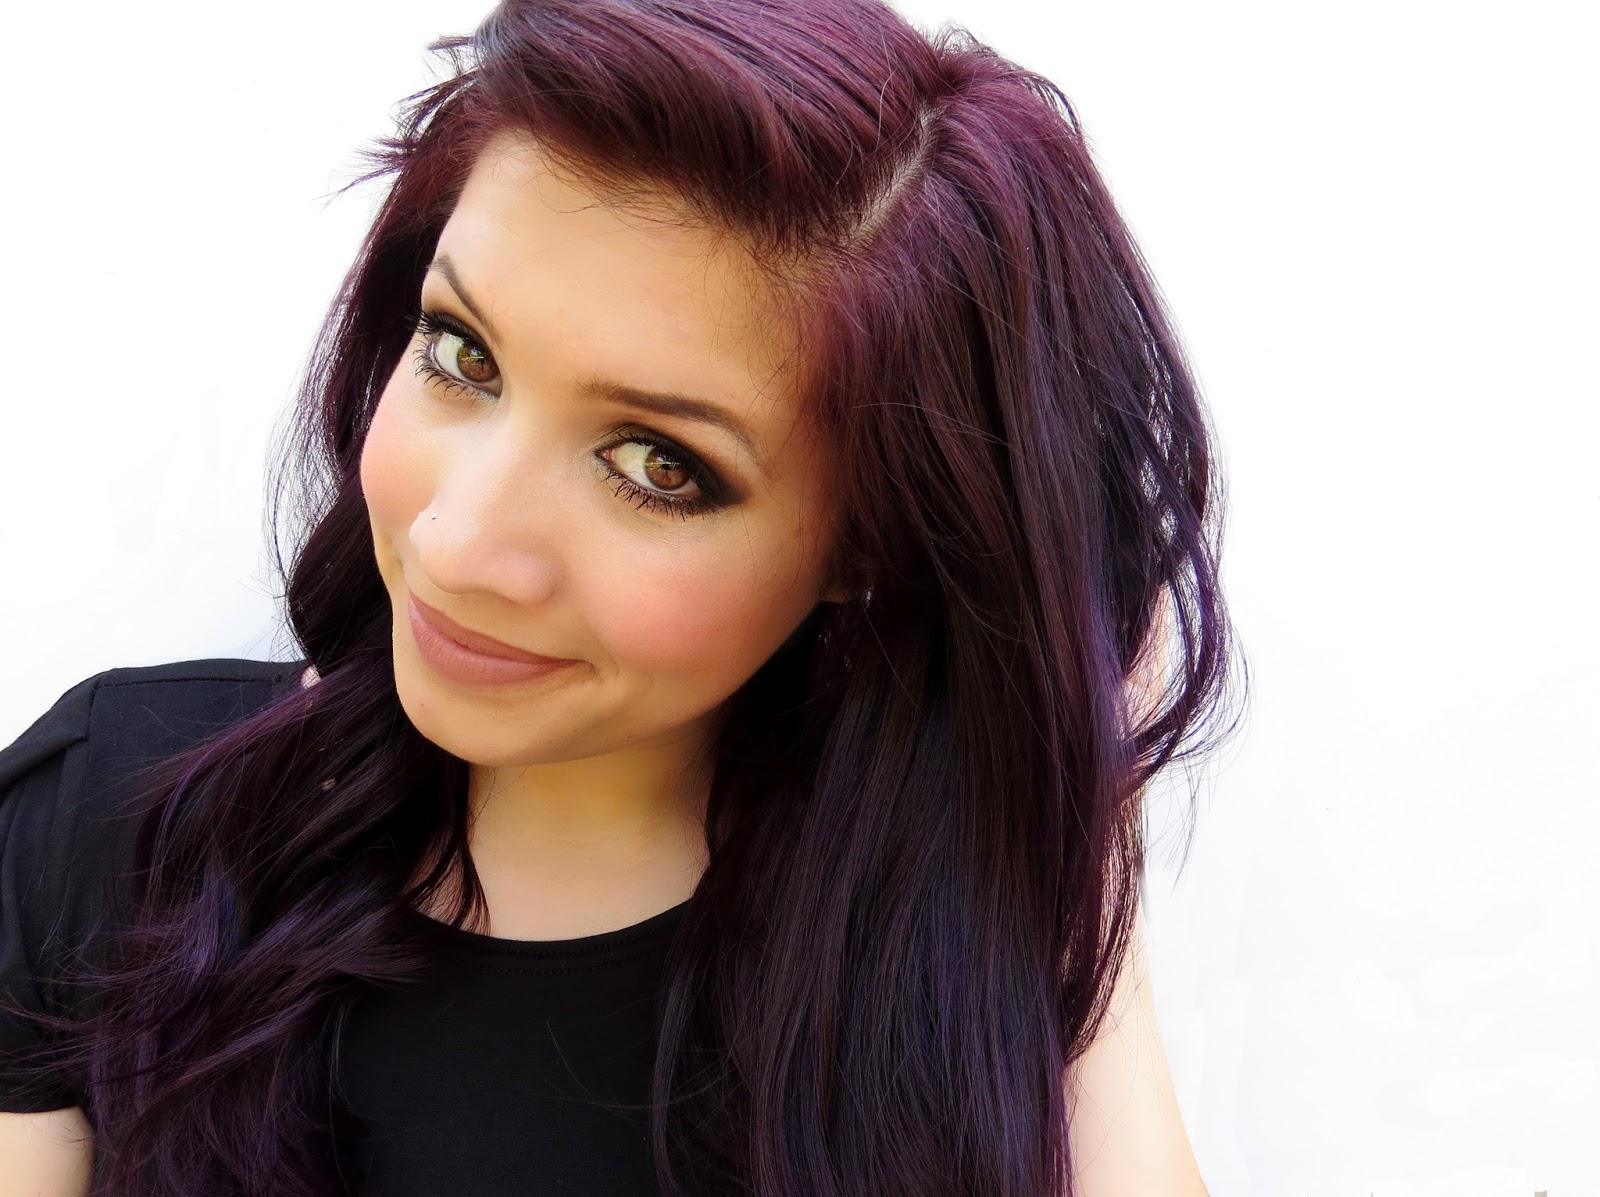 2. How to Dye Your Hair Purple Over Blue - wide 7